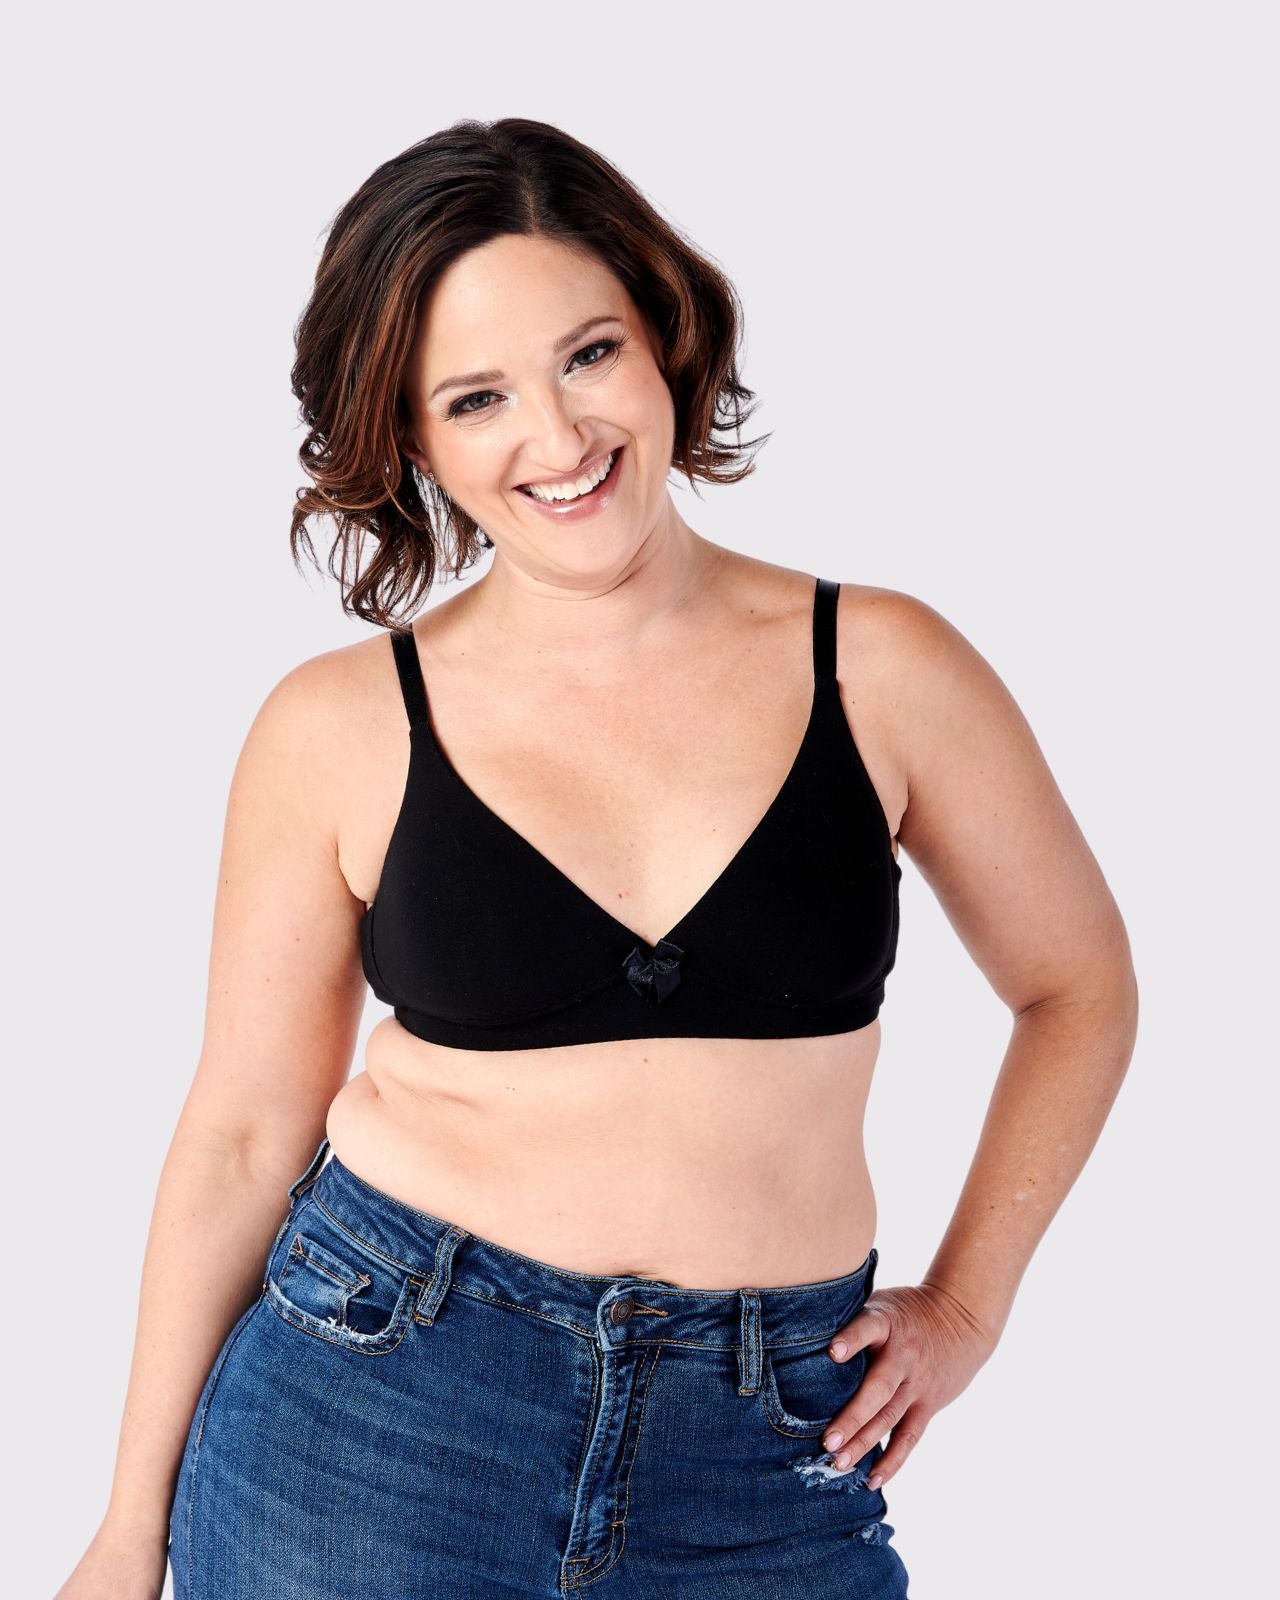 Shyaway on X: #BraGuide Plunge bras are designed so you can wear low cut  clothes without your bra showing.  / X